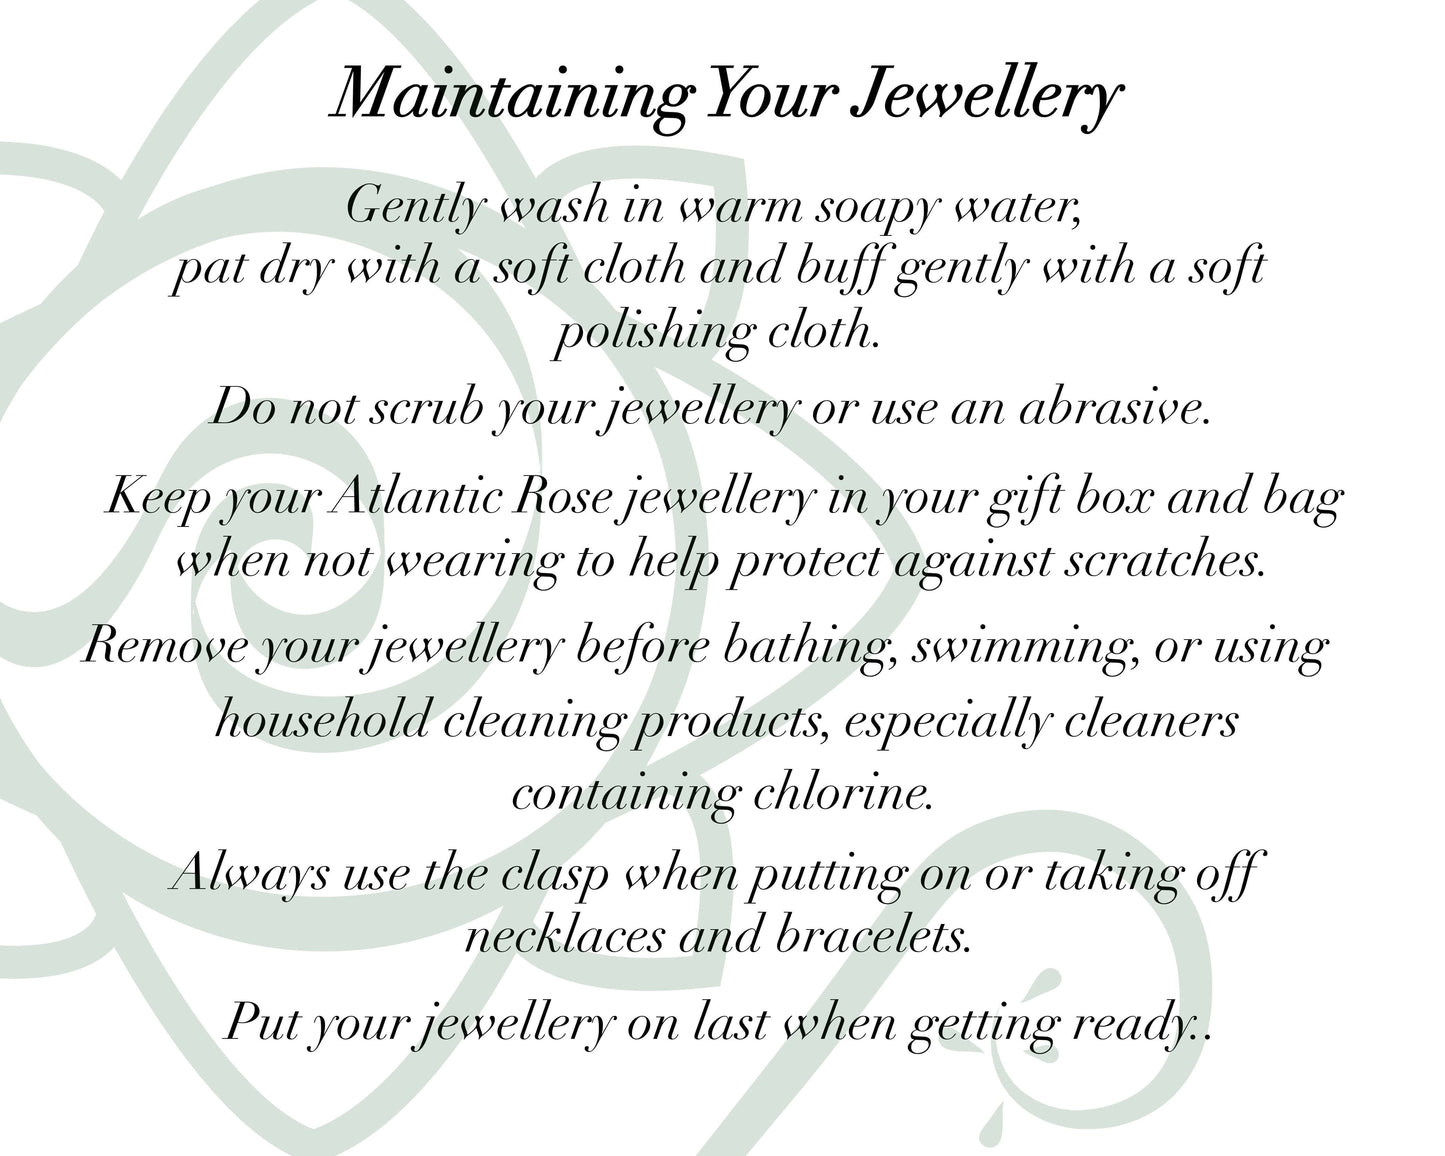 Care Instructions for jewellery by Atlantic Rose